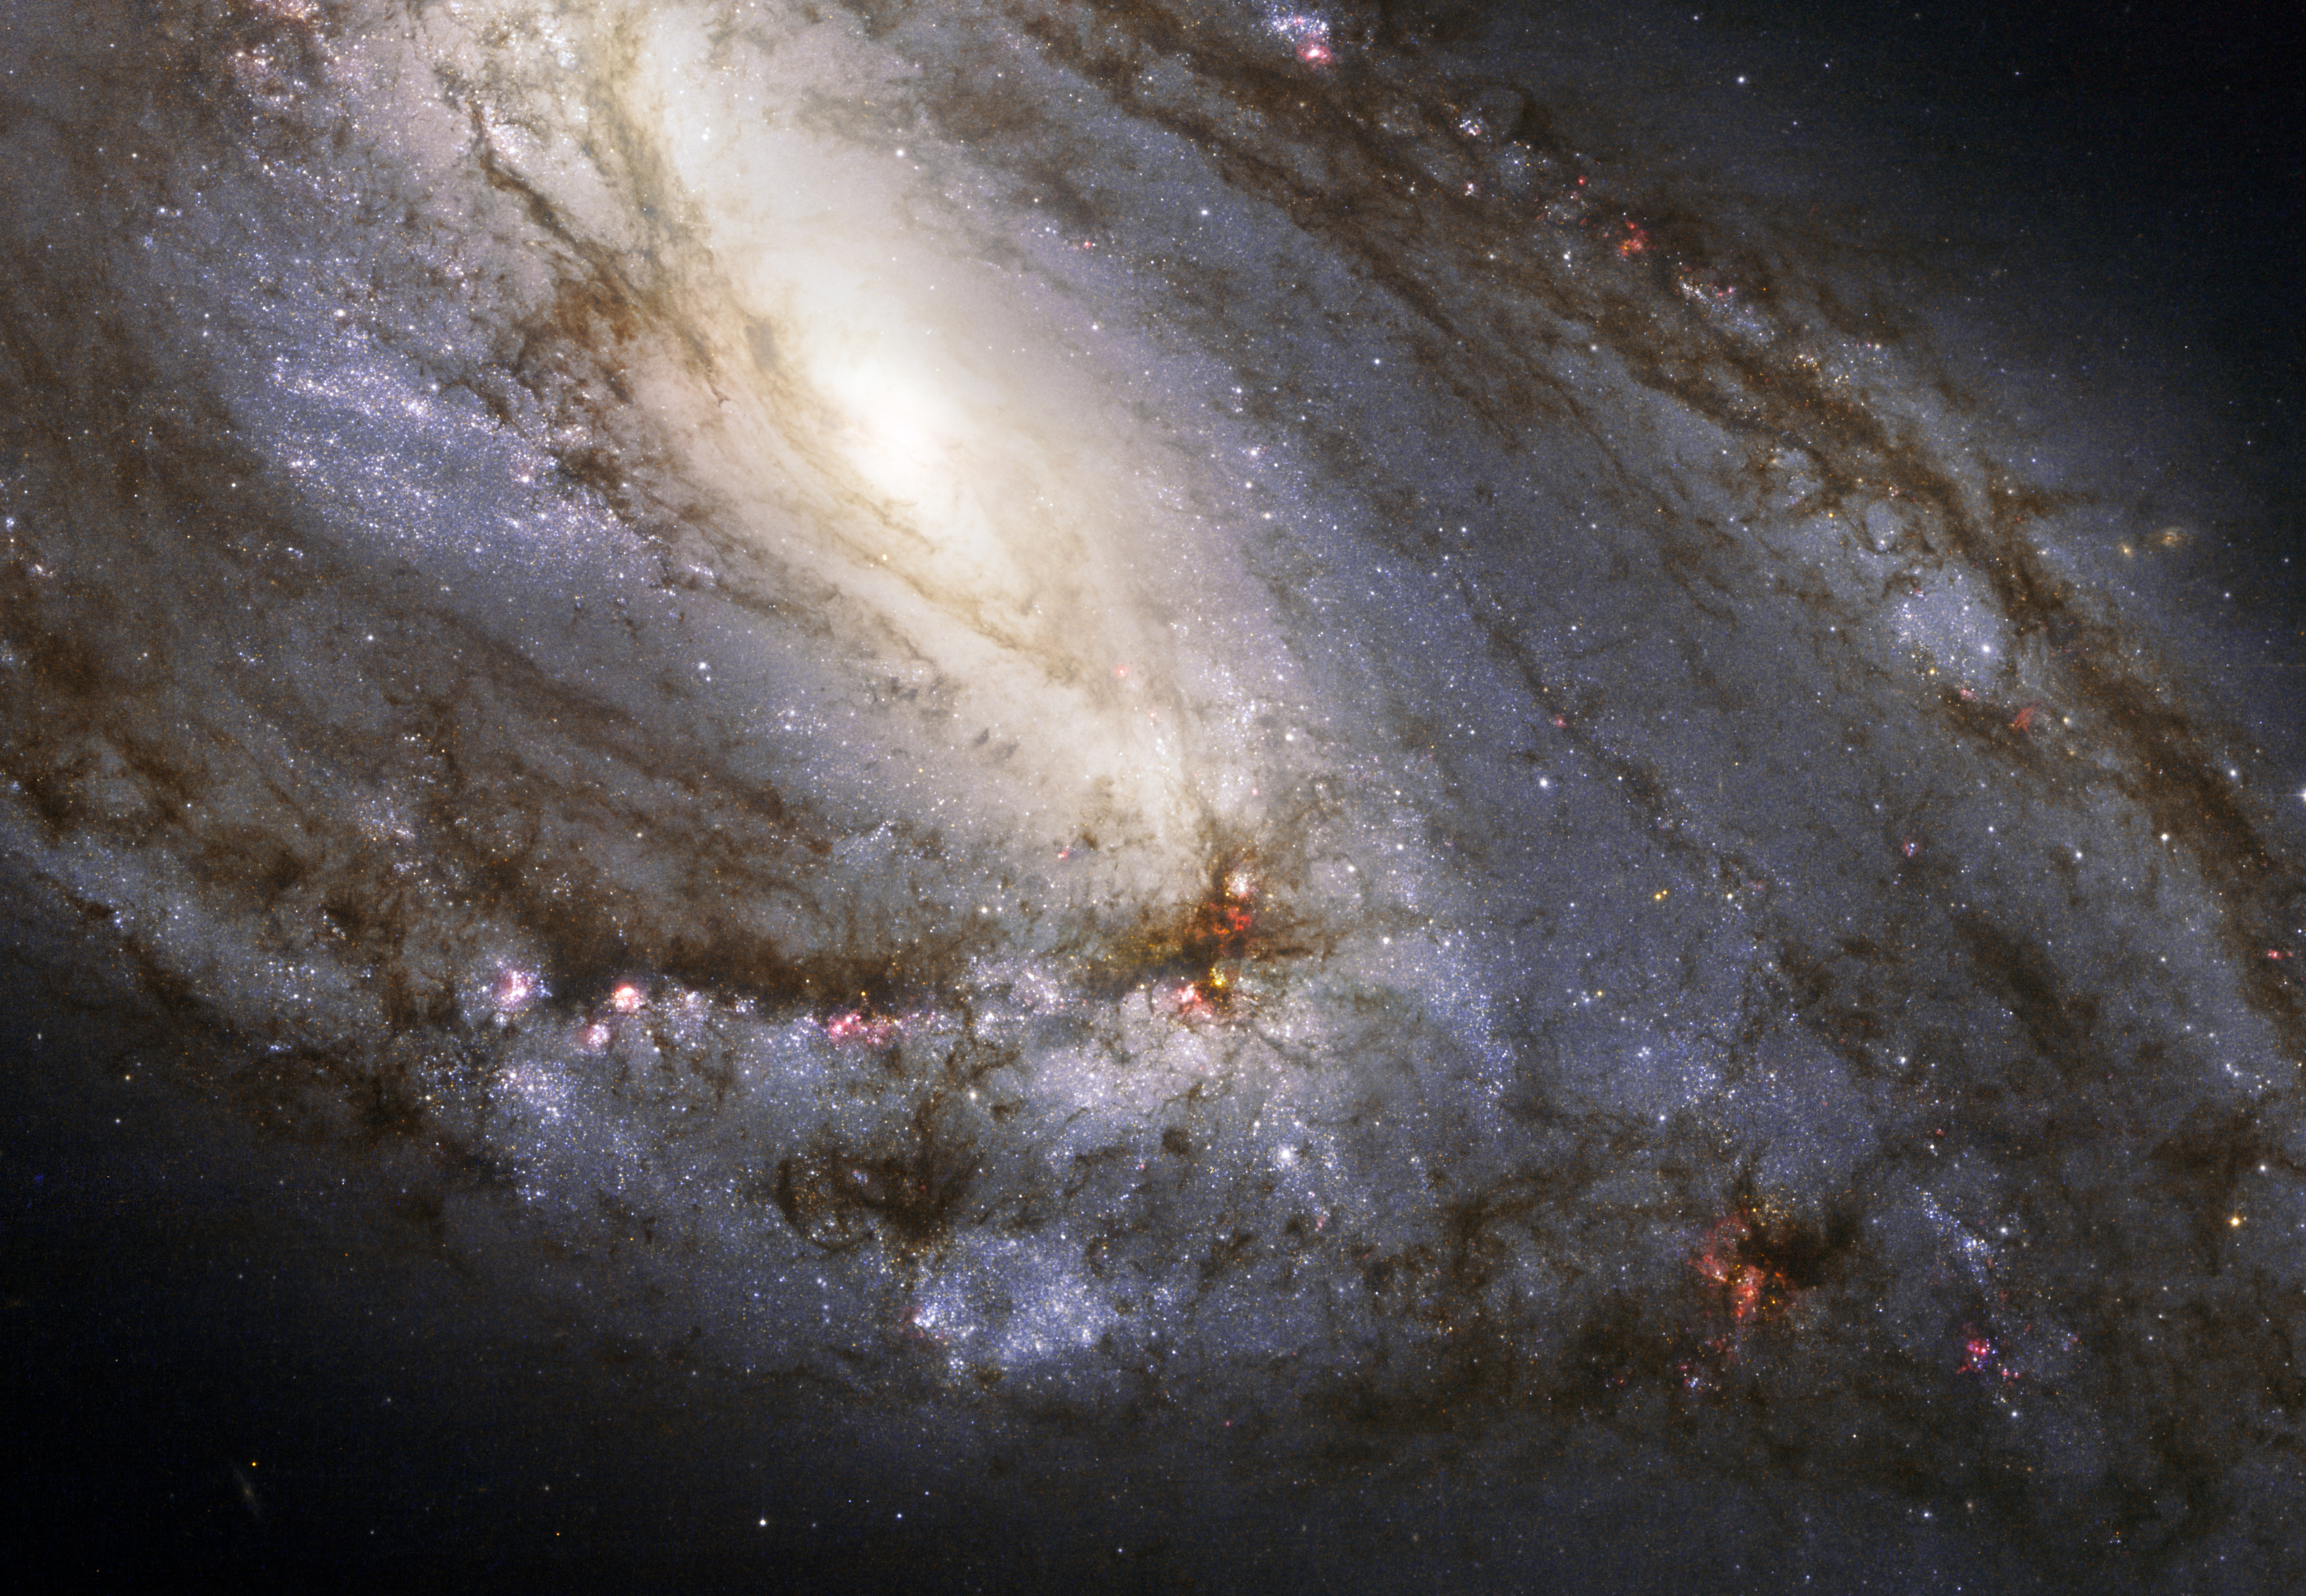 Unusual Spiral Galaxy M66 from Hubble